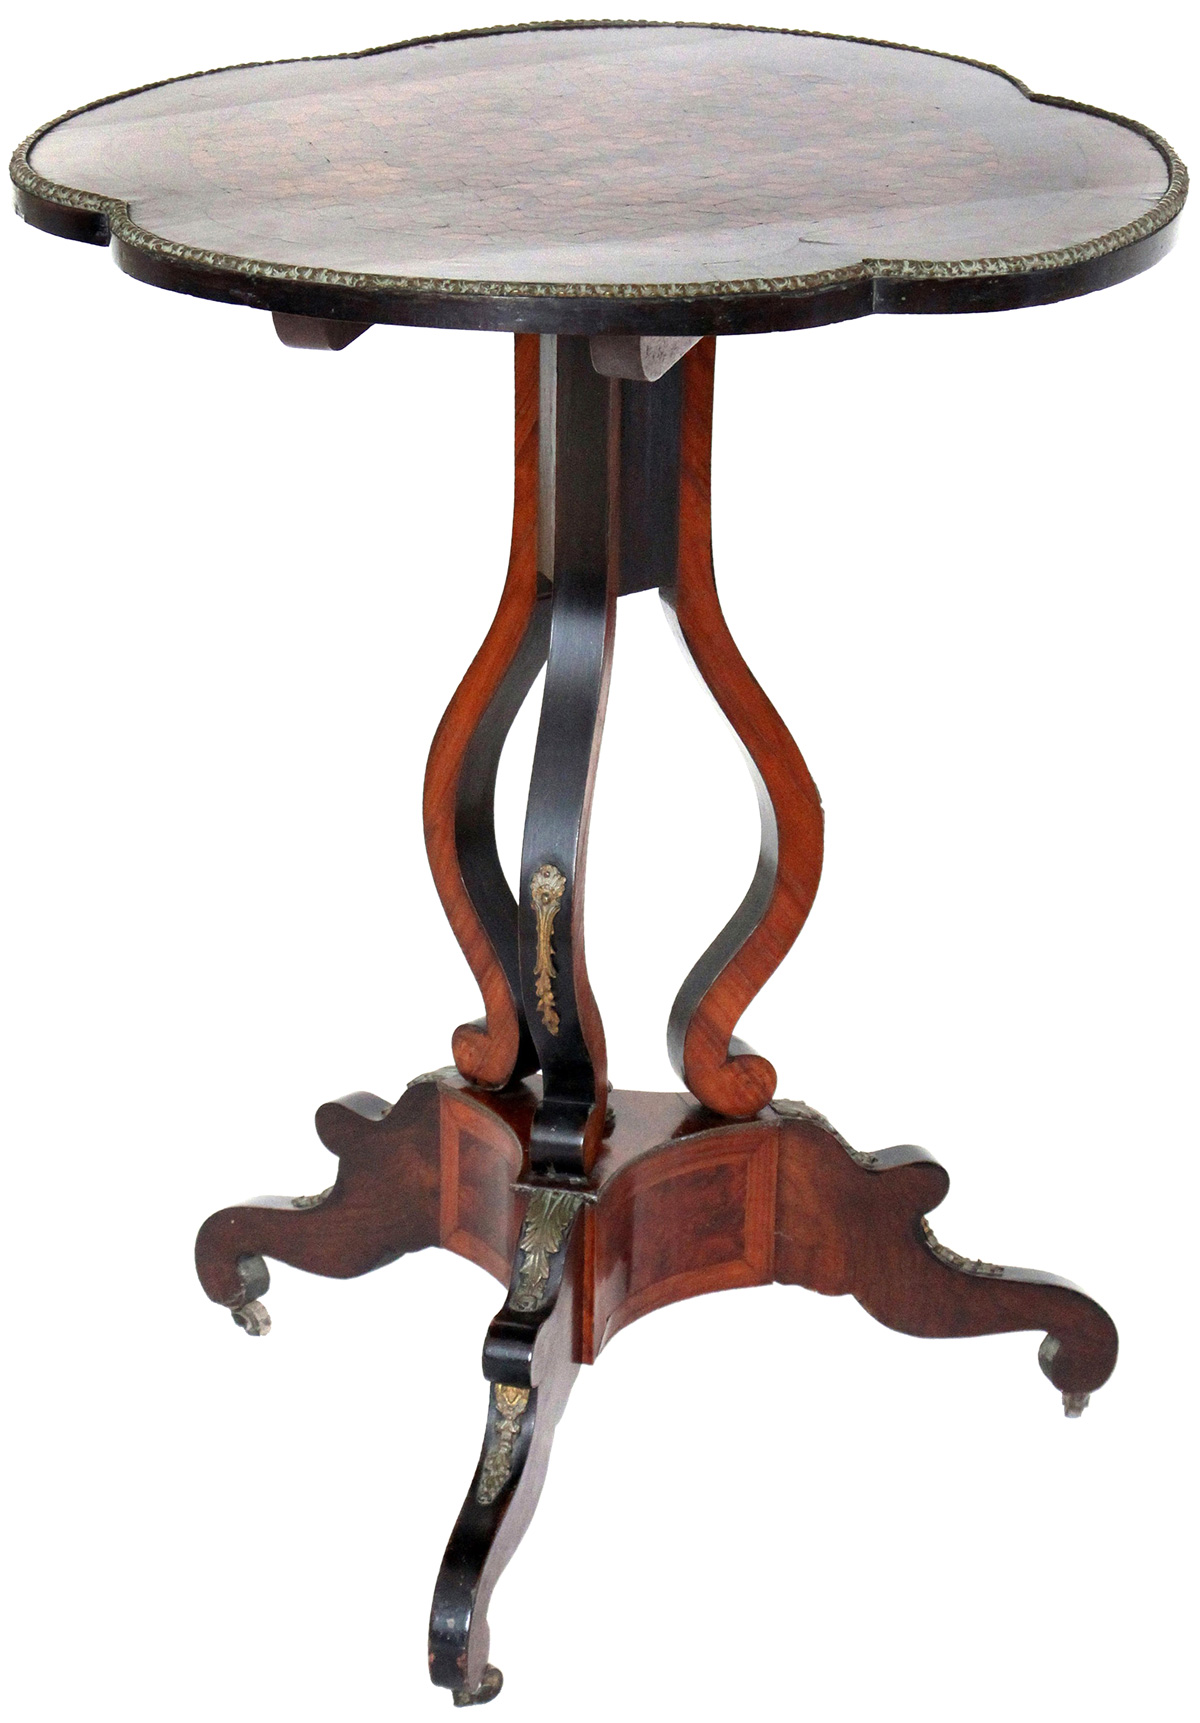 Antique Tilt-Top Tea Table with Marquetry Tabletop - שולחן תה מתקפל עתיק - Back To List of Antique Furniture